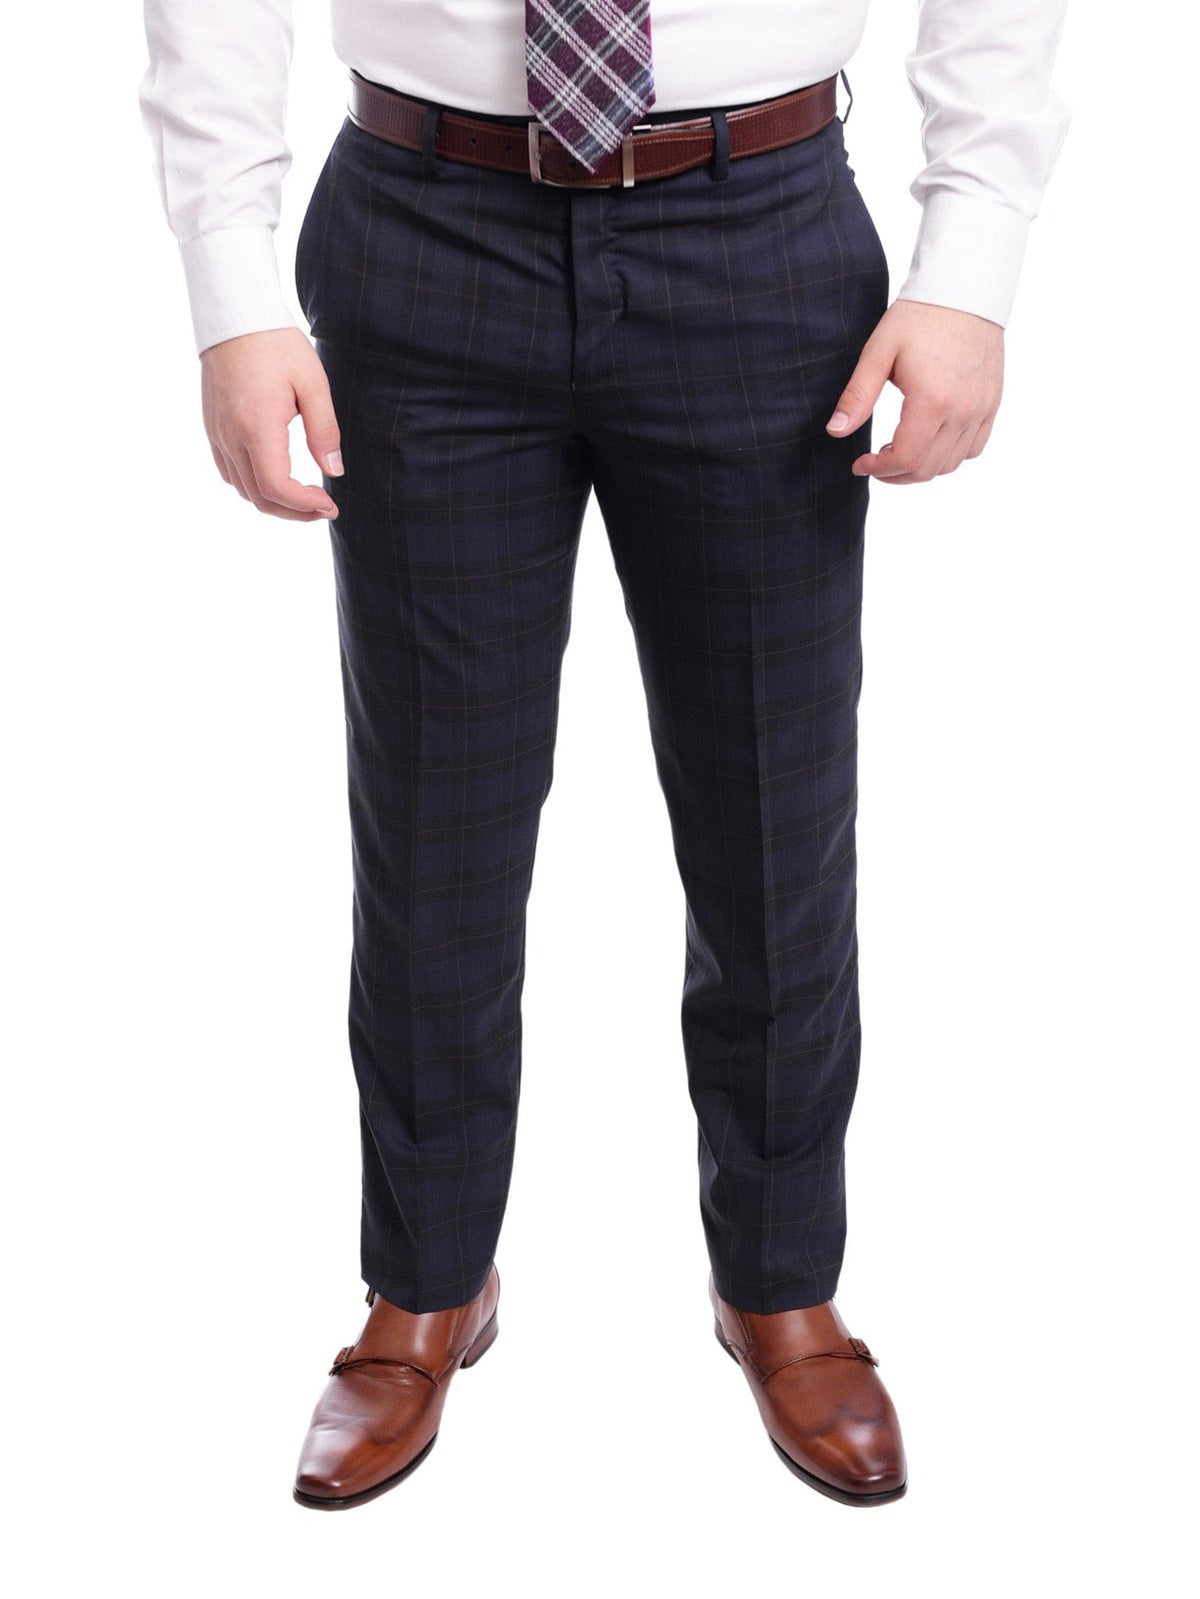 Napoli TWO PIECE SUITS Napoli Slim Fit Navy Blue Plaid With Red Windowpane Half Canvassed Wool Suit